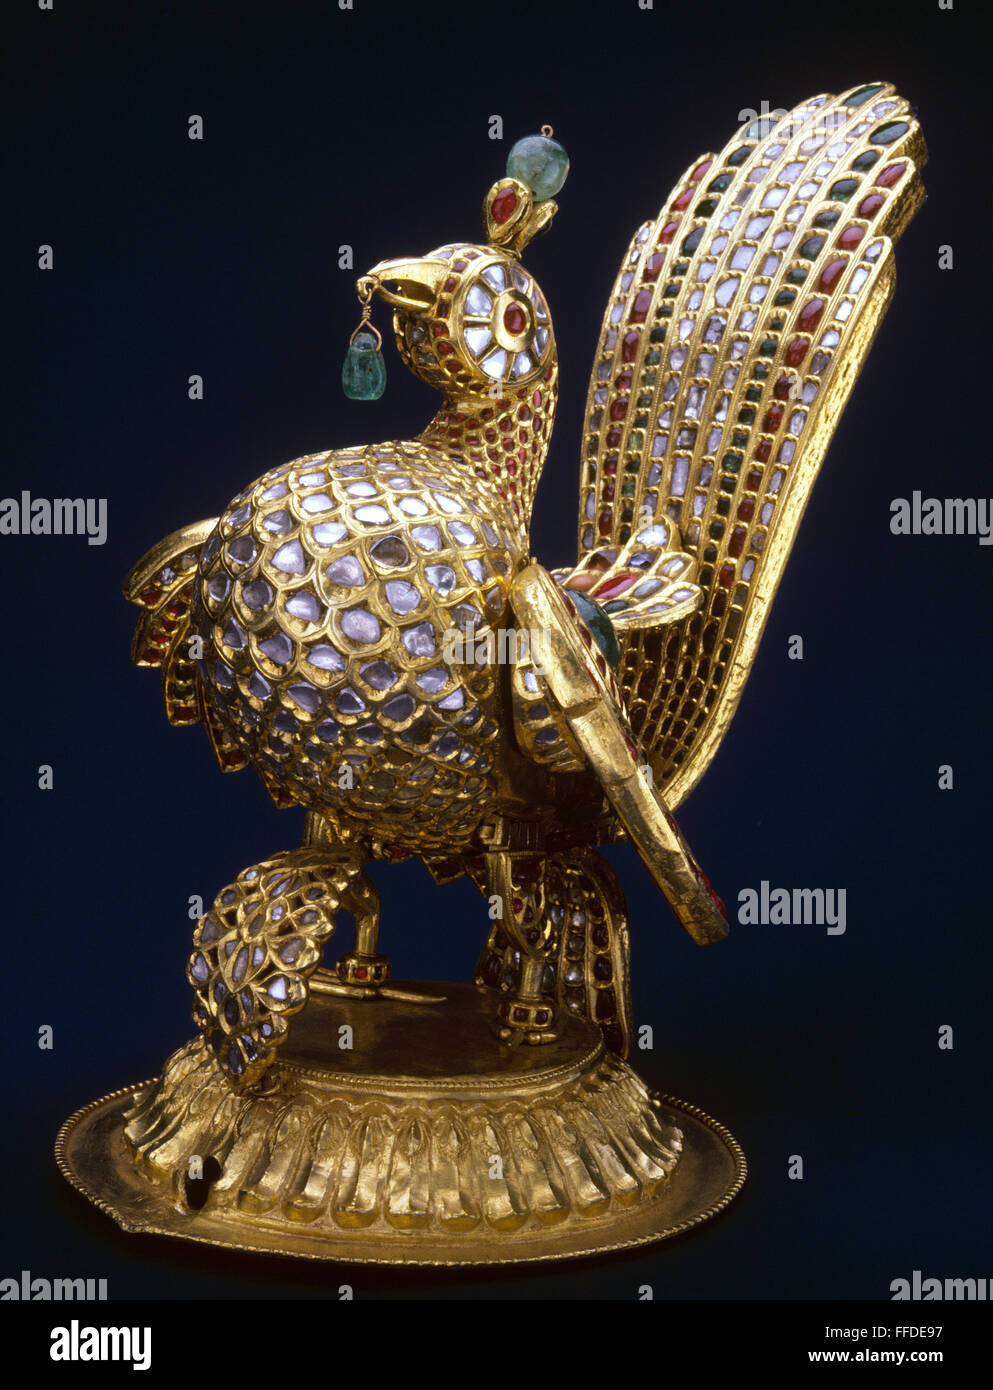 INDIA: MYSORE TREASURE. /nGold and jewel mythological peacock, which would have been perched atop the maharaja's throne umbrella at the palace of Mysore, India. Stock Photo